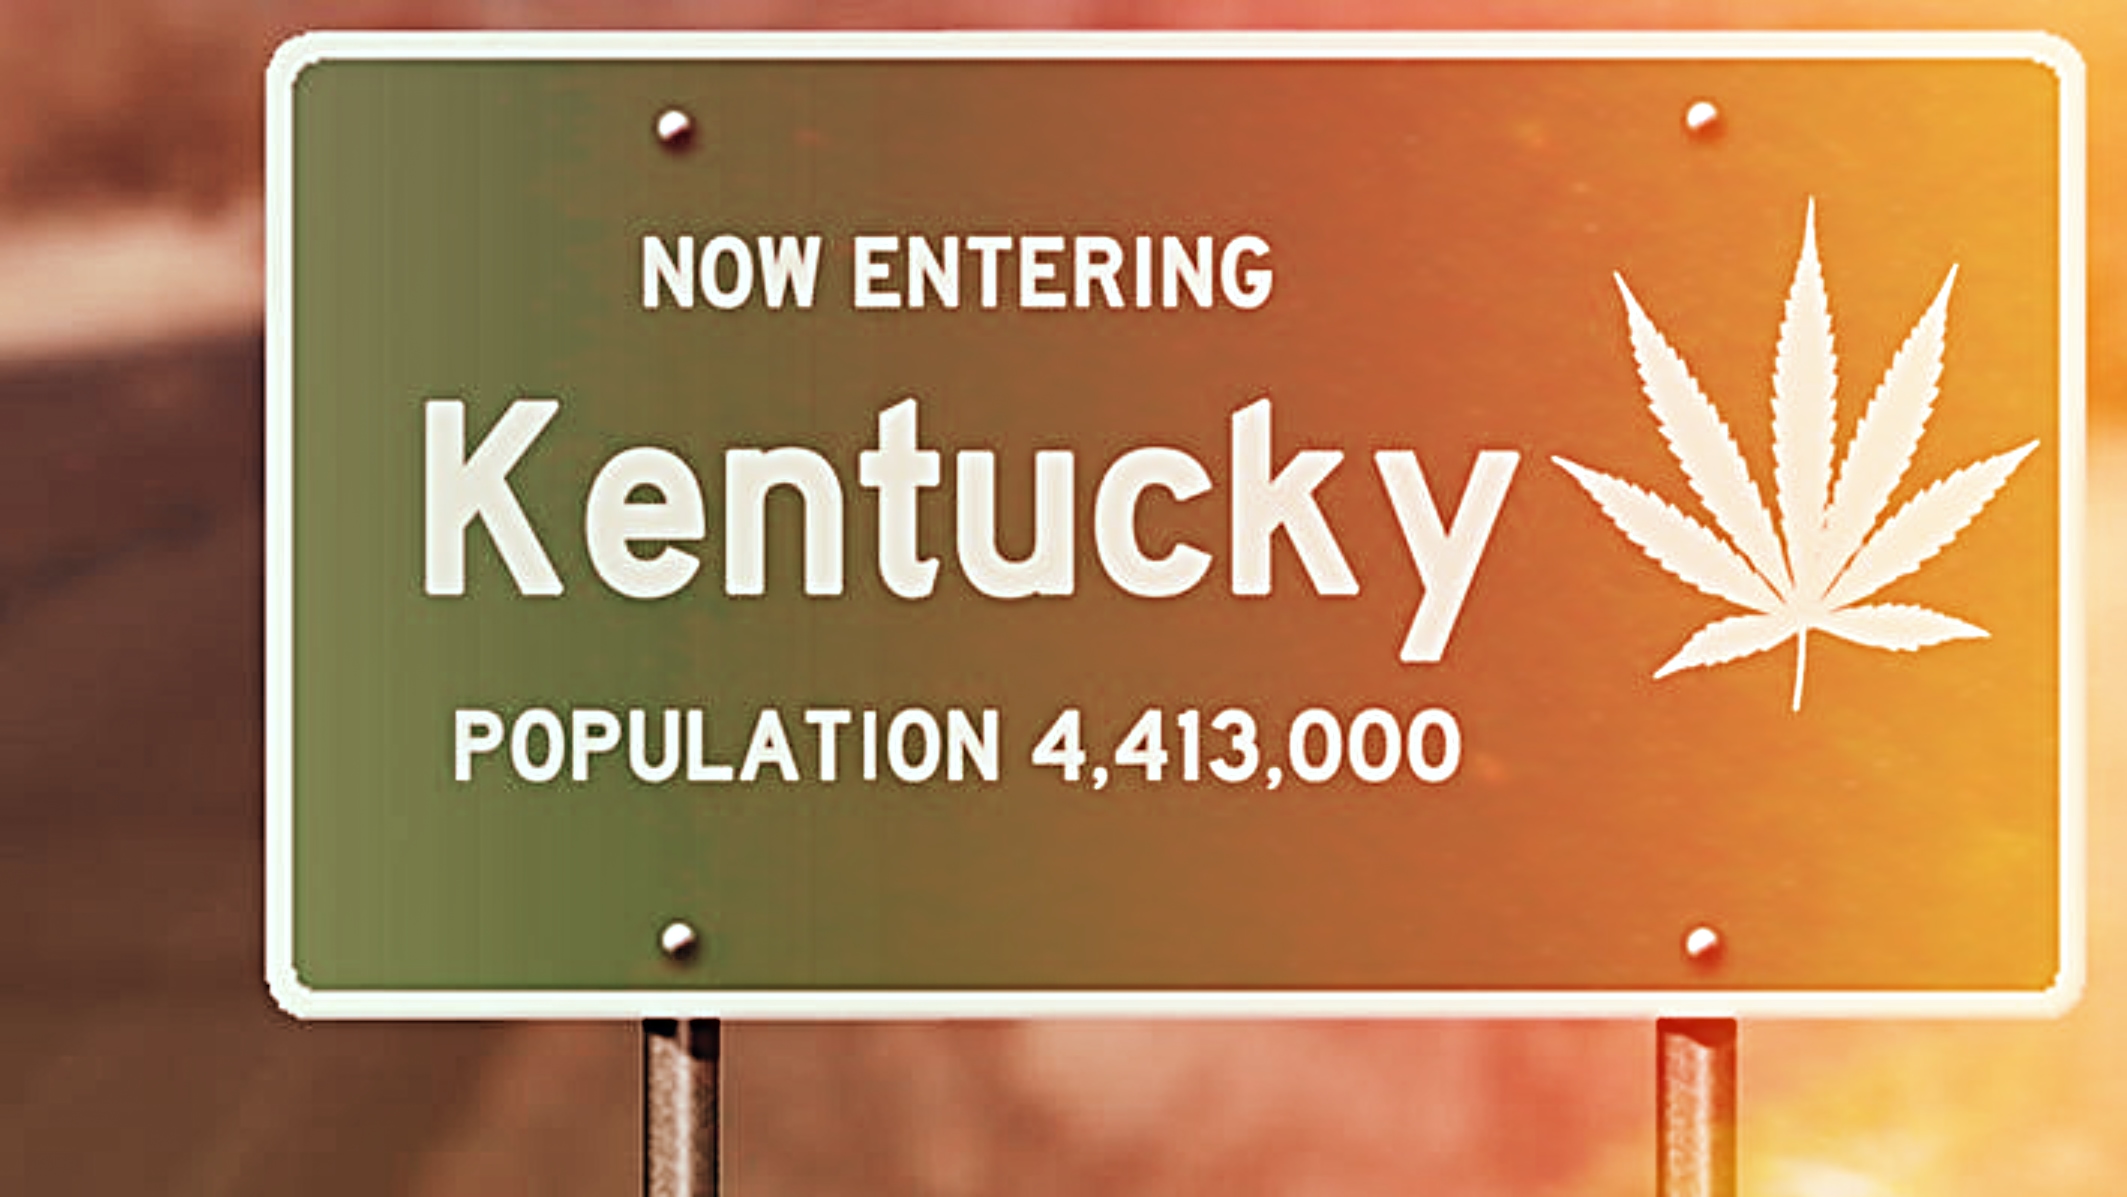 Kentucky Governor signs medical marijuana bill into law, along with Sports Betting